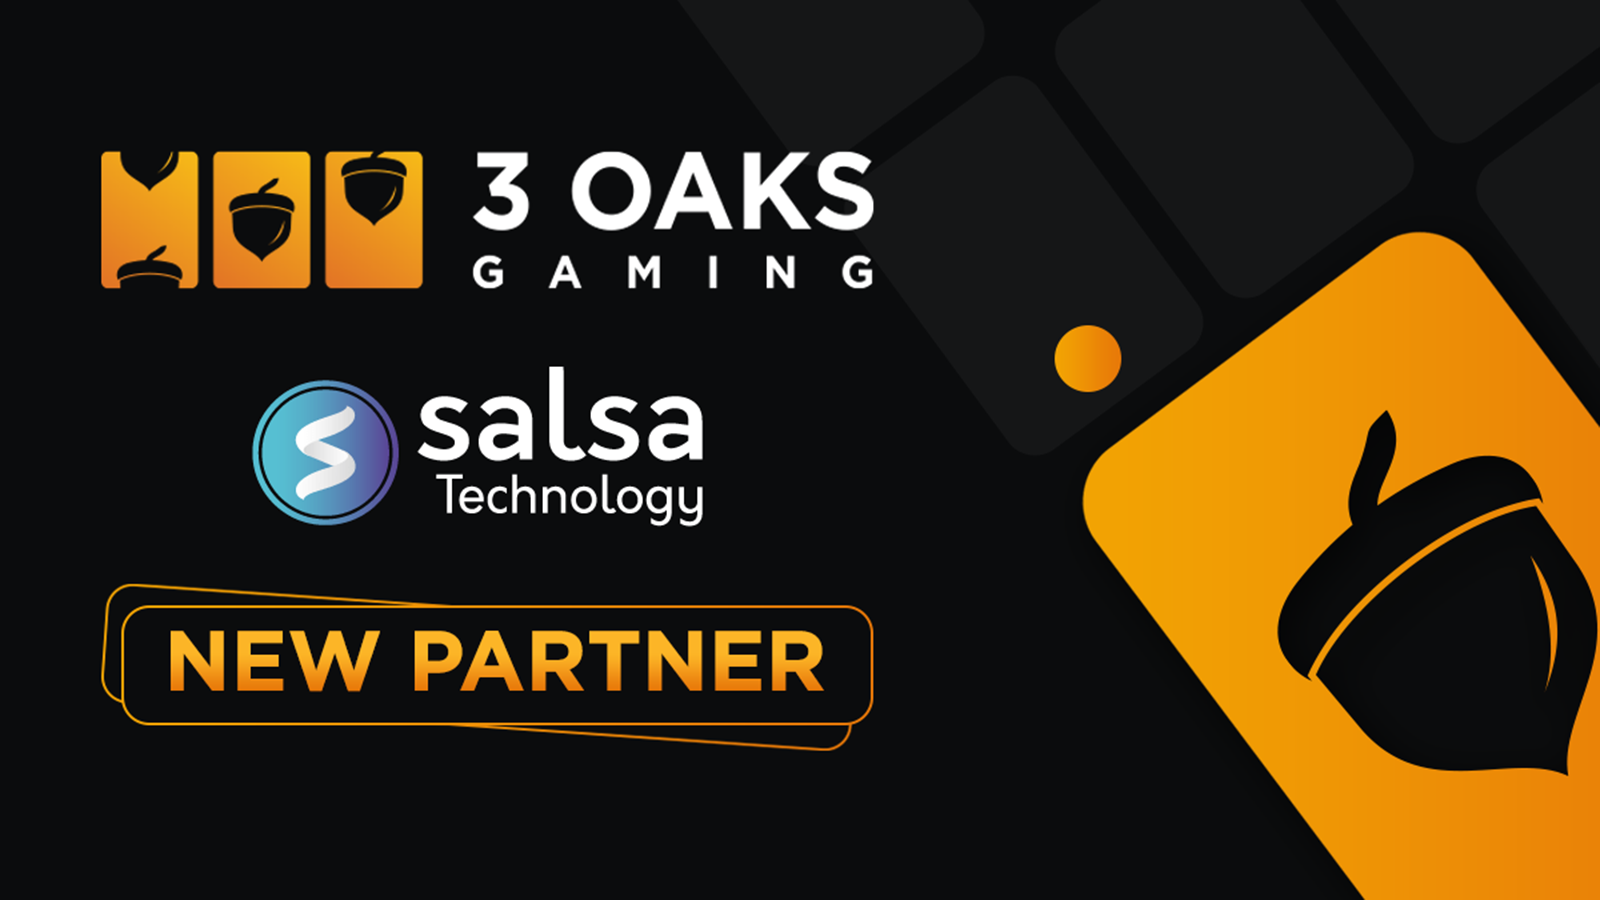 3 Oaks Gaming's Expansion with Salsa Tech